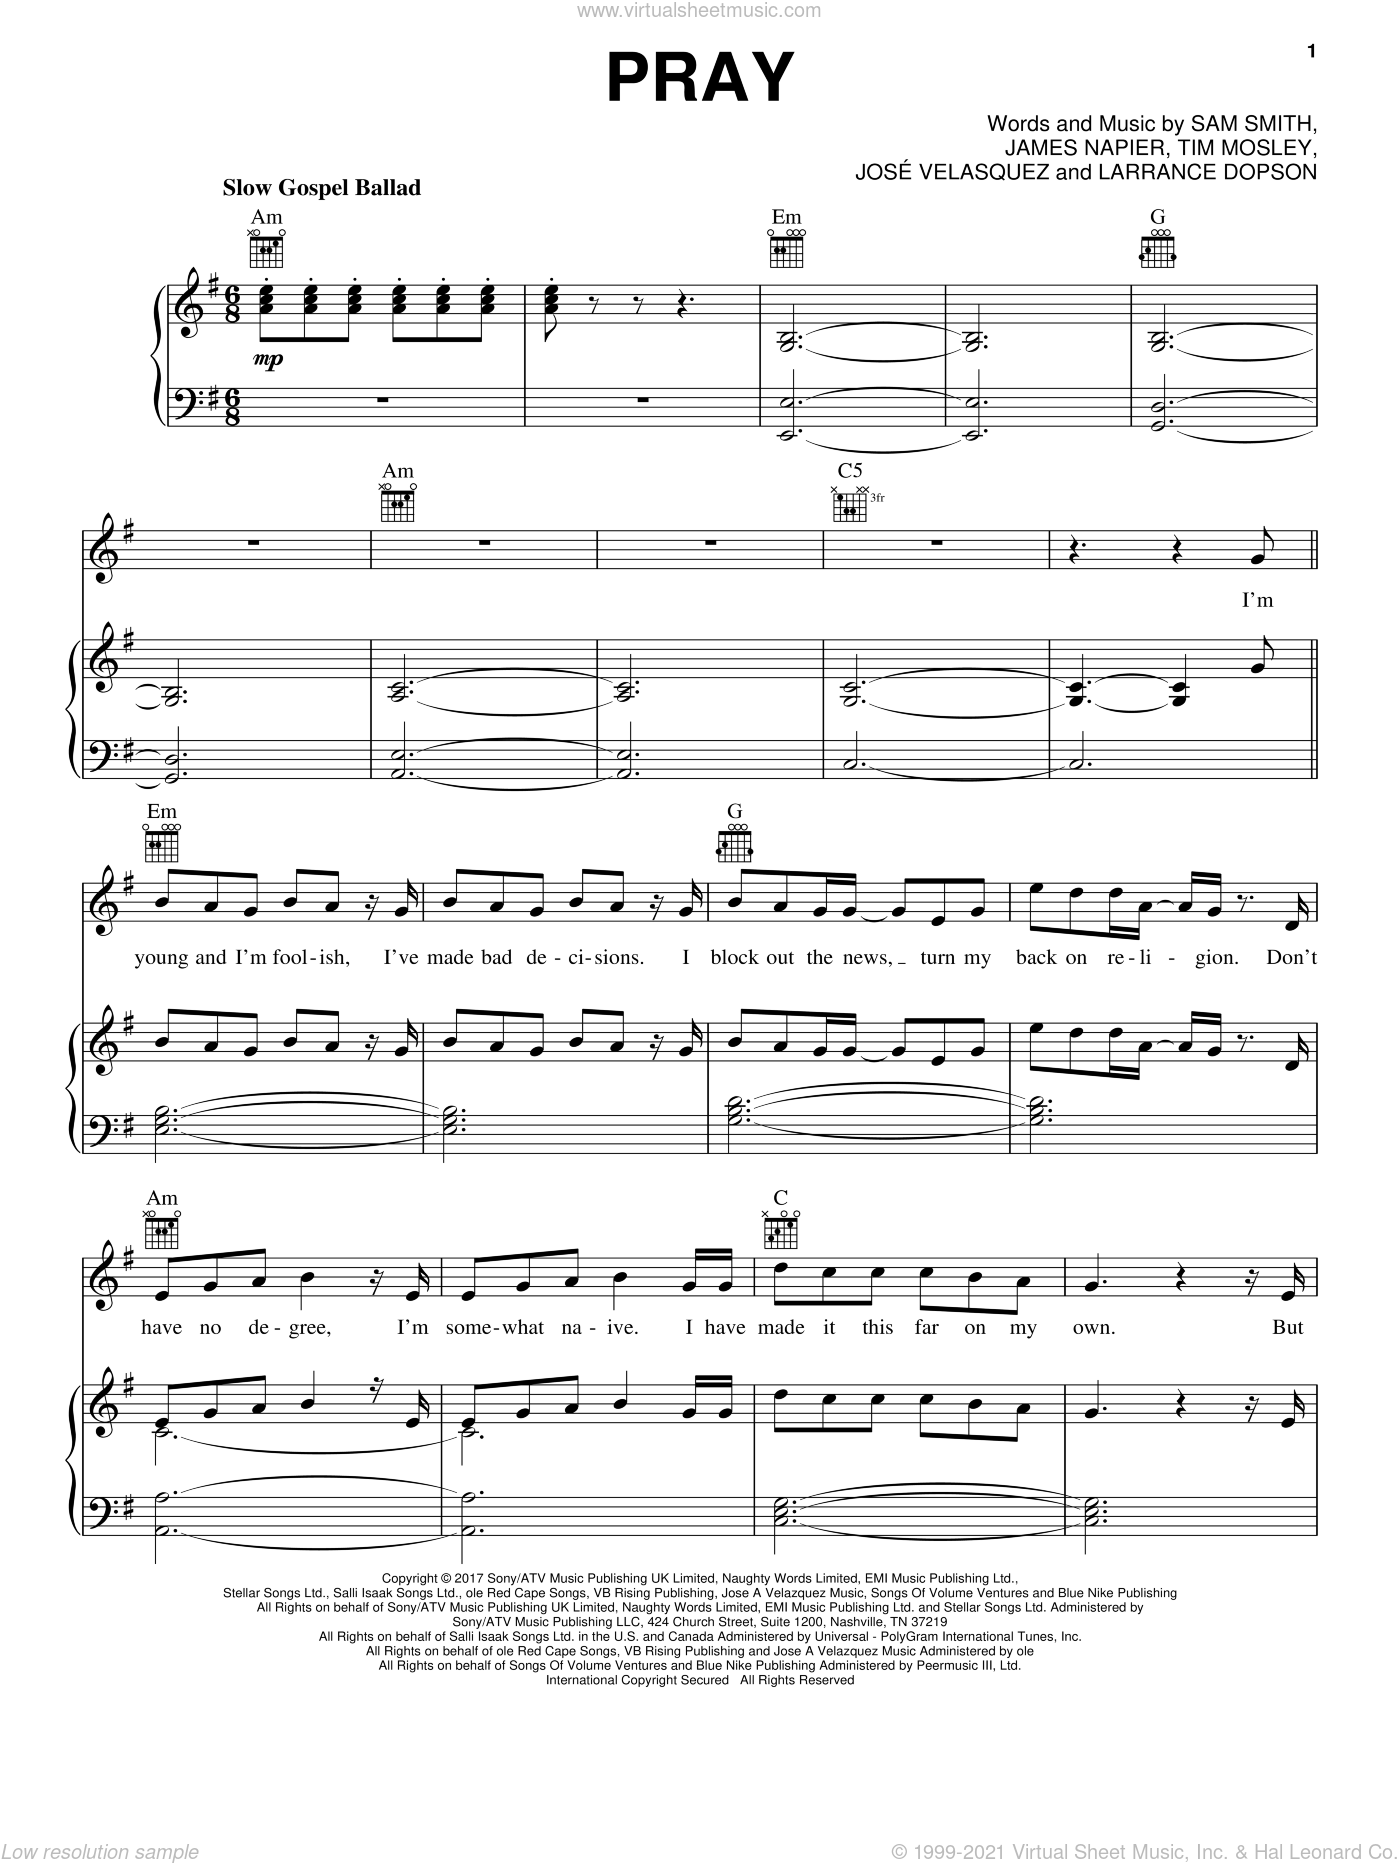 Smith - Pray sheet music for voice, piano or guitar (PDF)